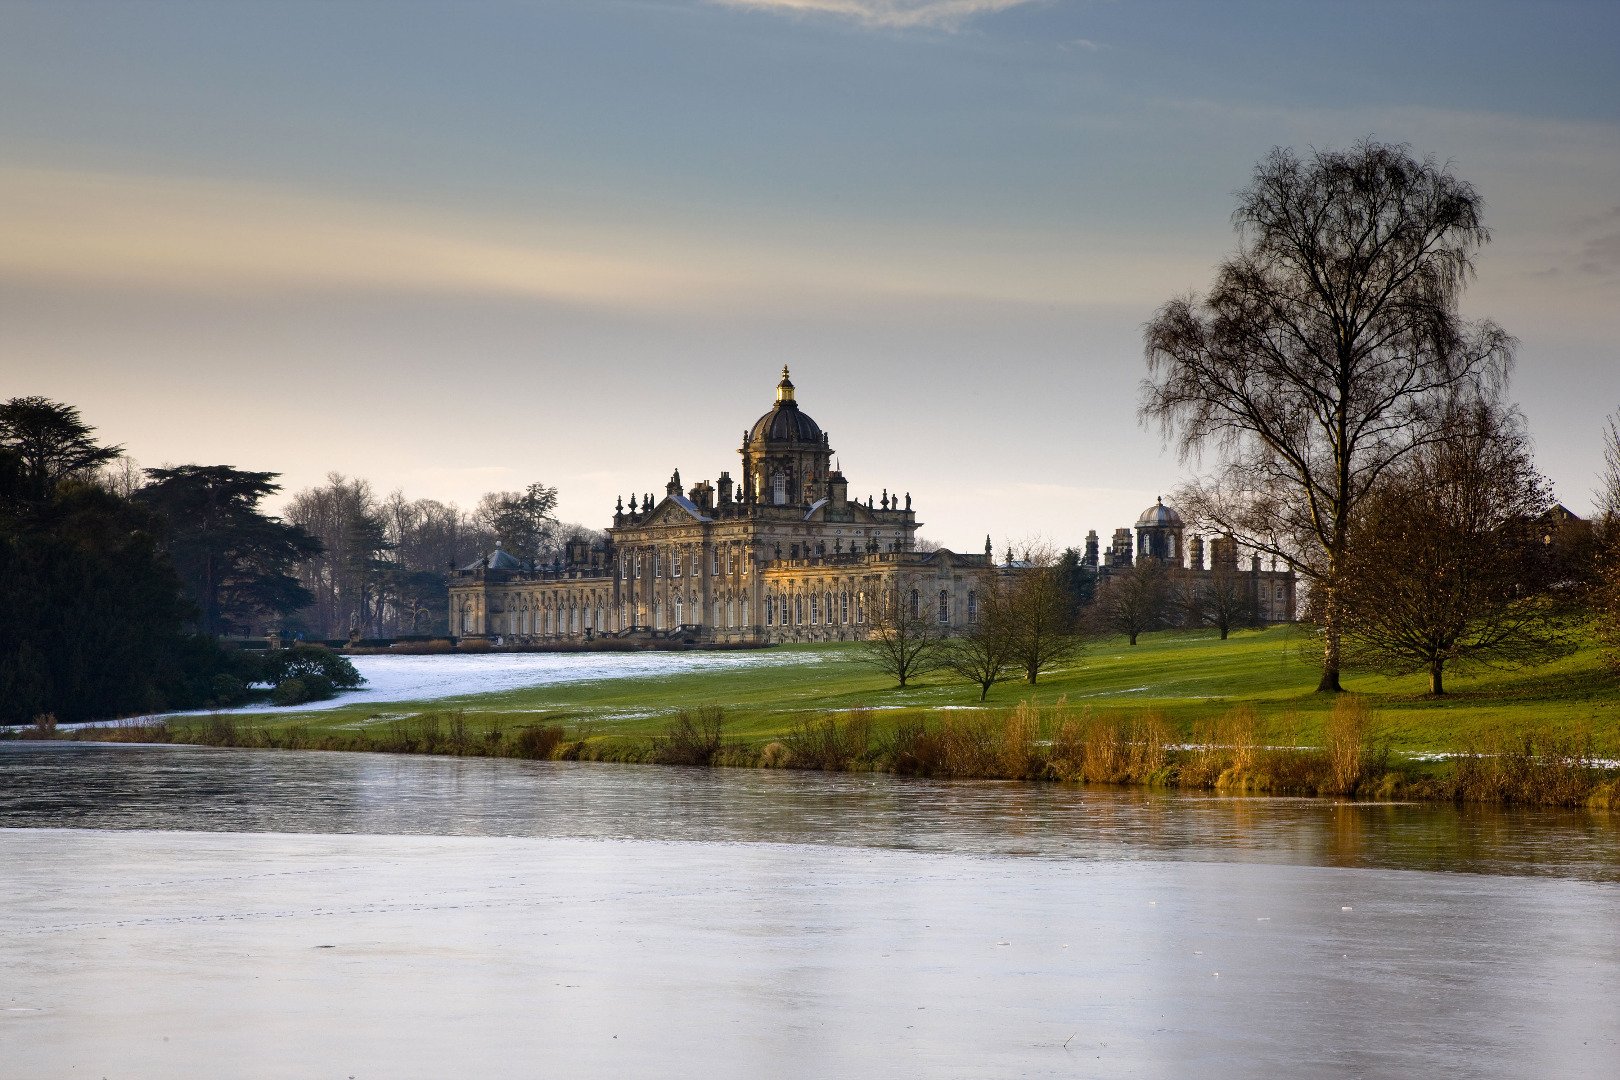 Image name castle howard and south lake mike kipling the 1 image from the post Yorkshire Stately Homes and Gardens in Yorkshire.com.